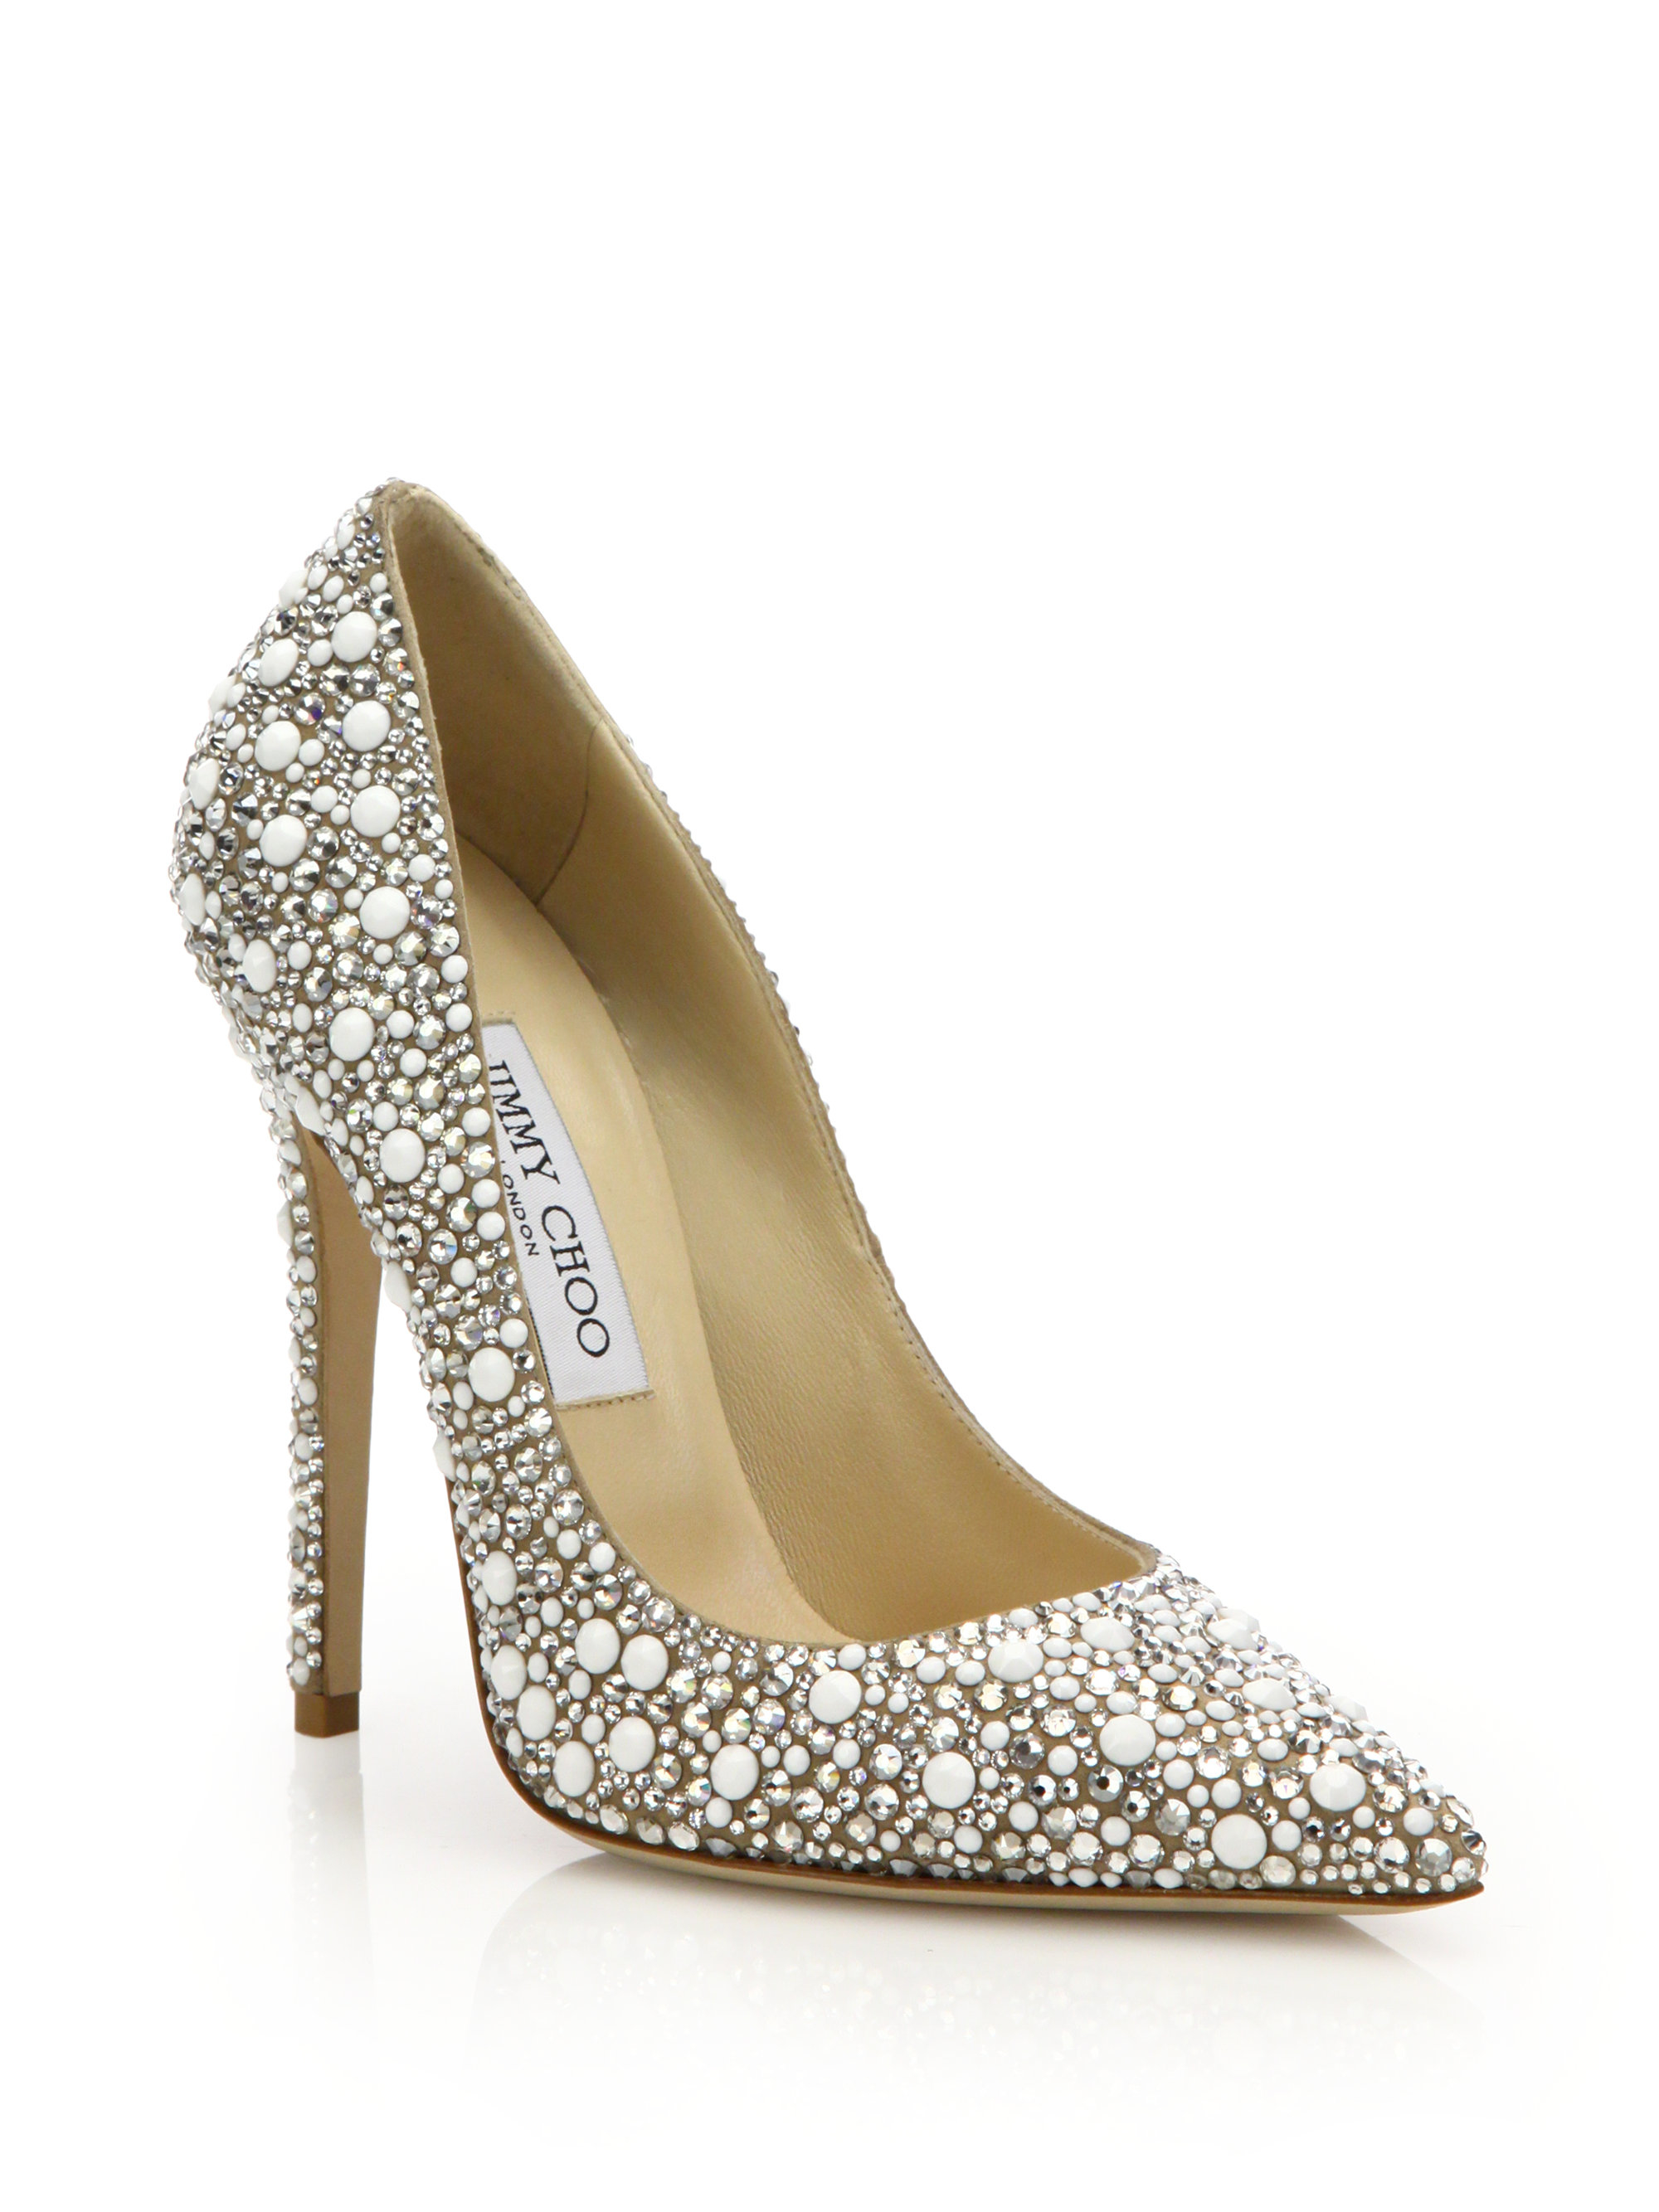 Jimmy Choo Anouk 120 Crystal-embellished Suede Pumps in White - Lyst